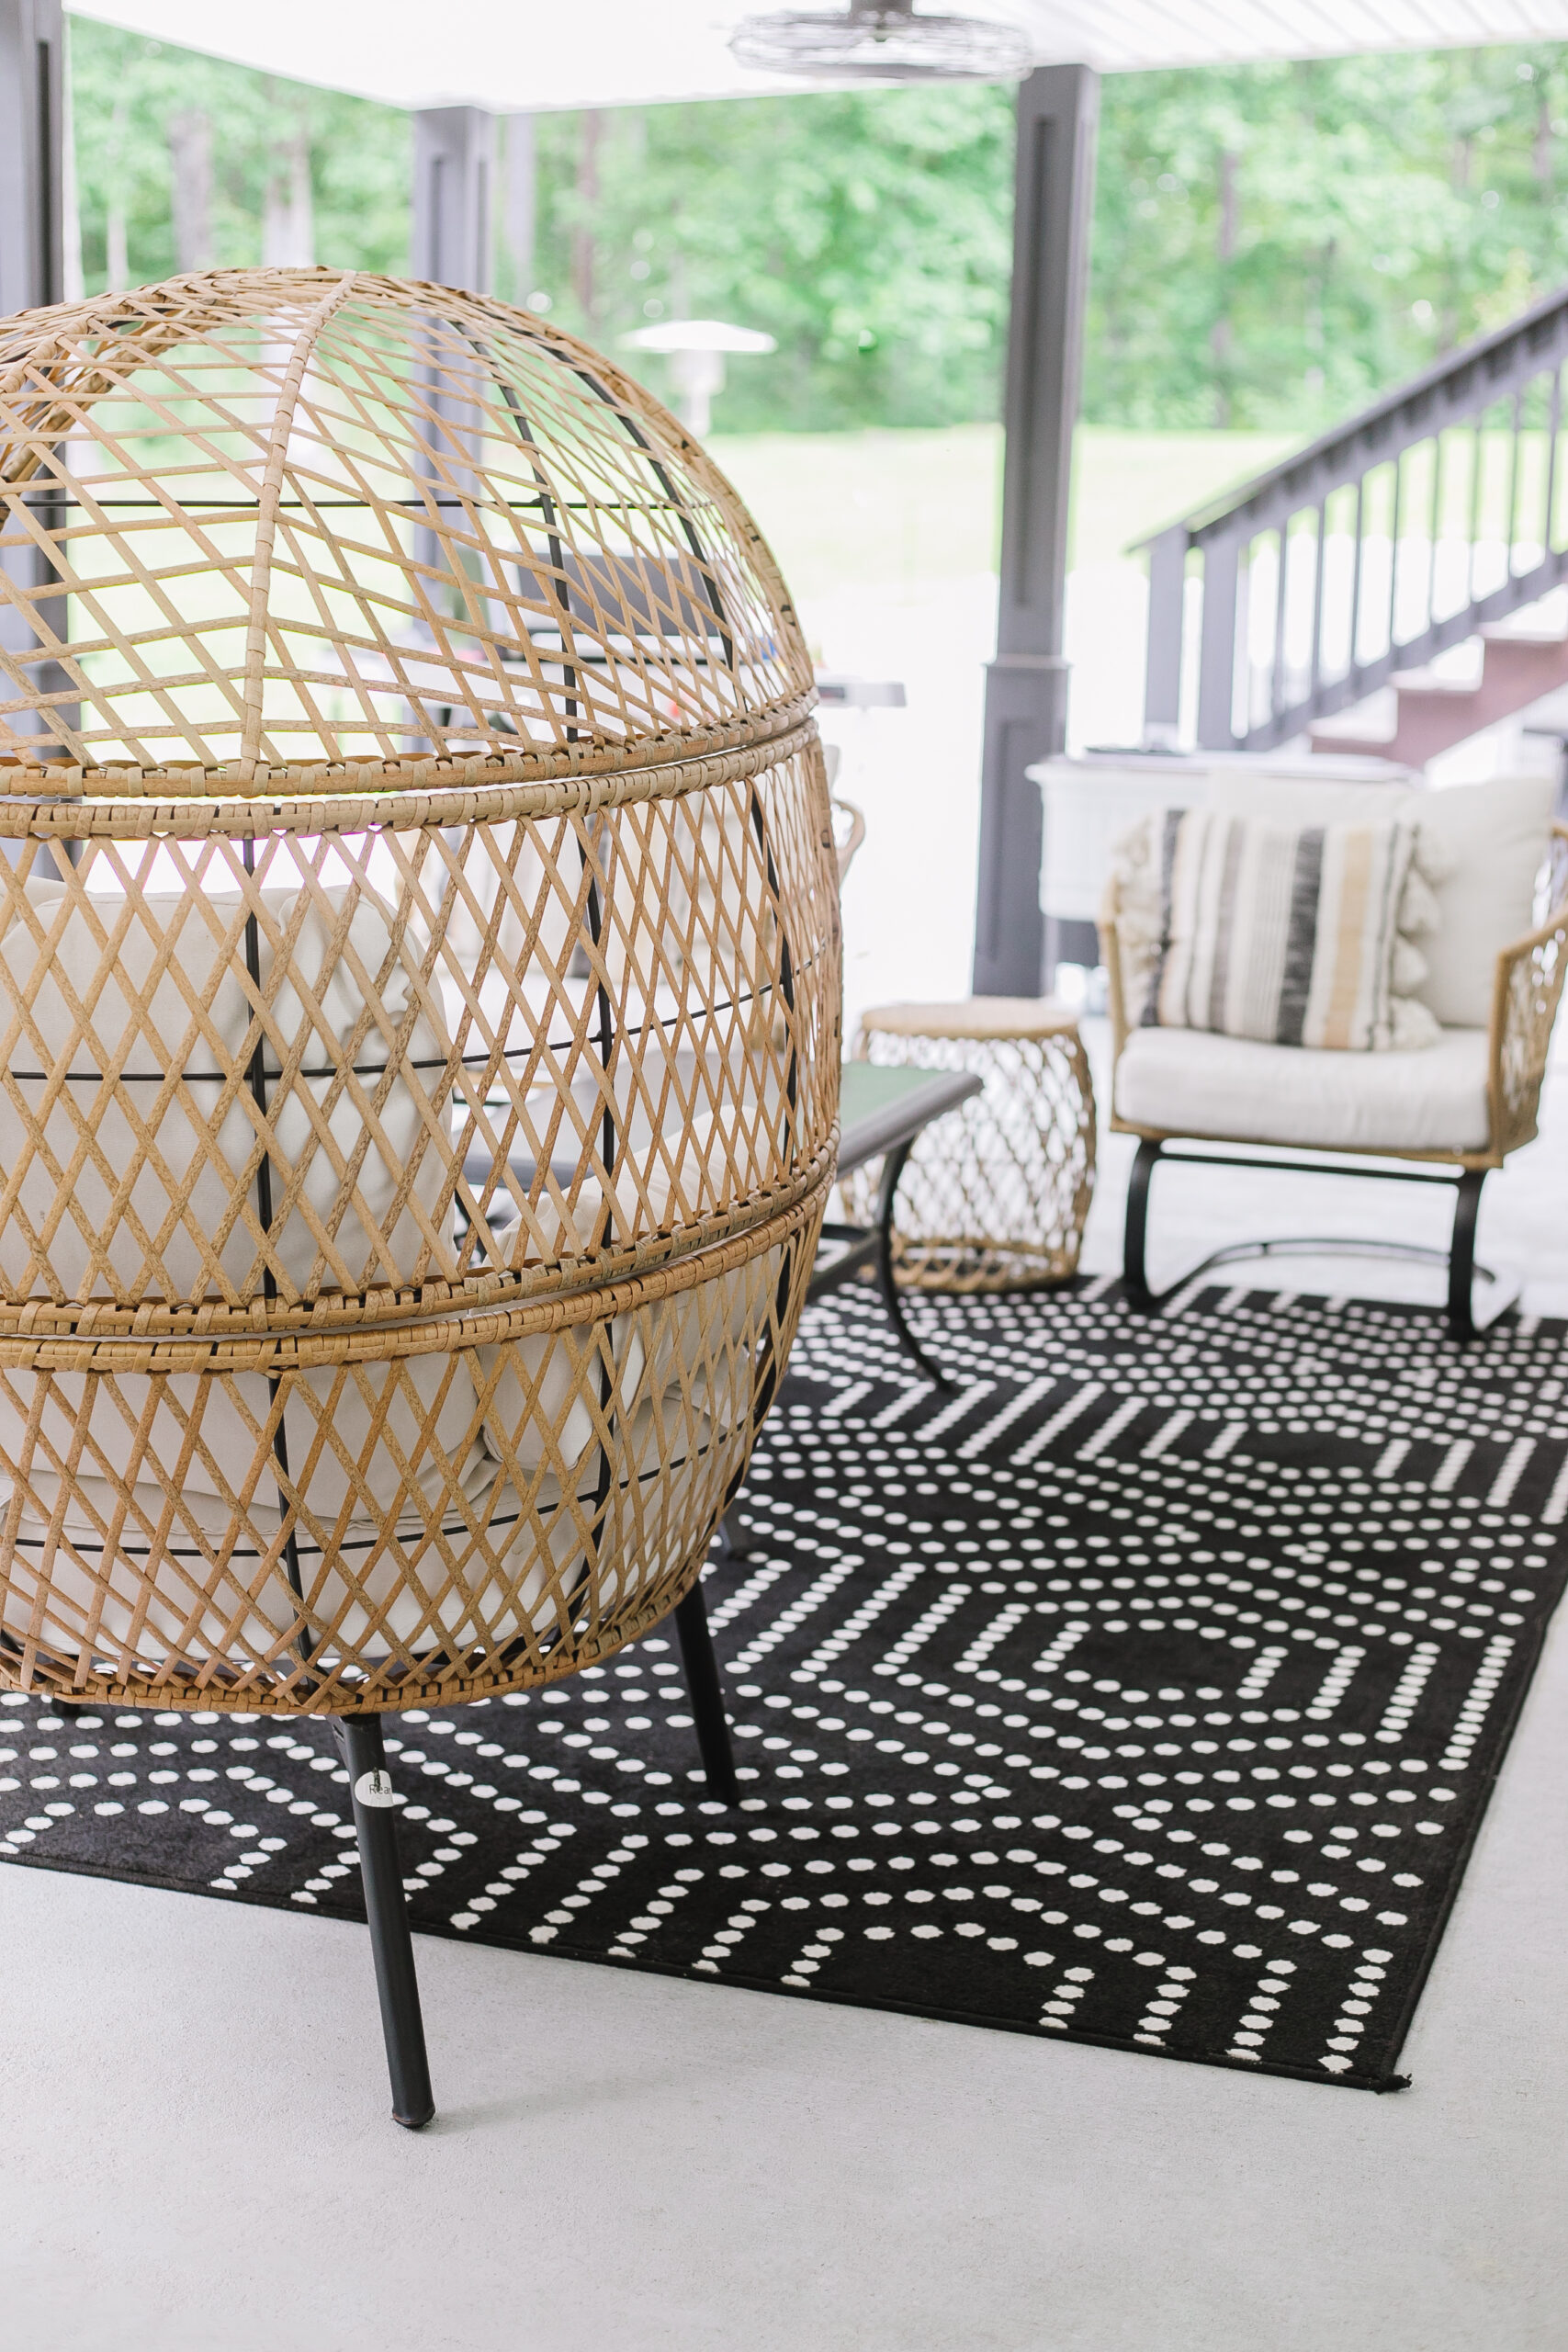 outdoor rug cleaning tips